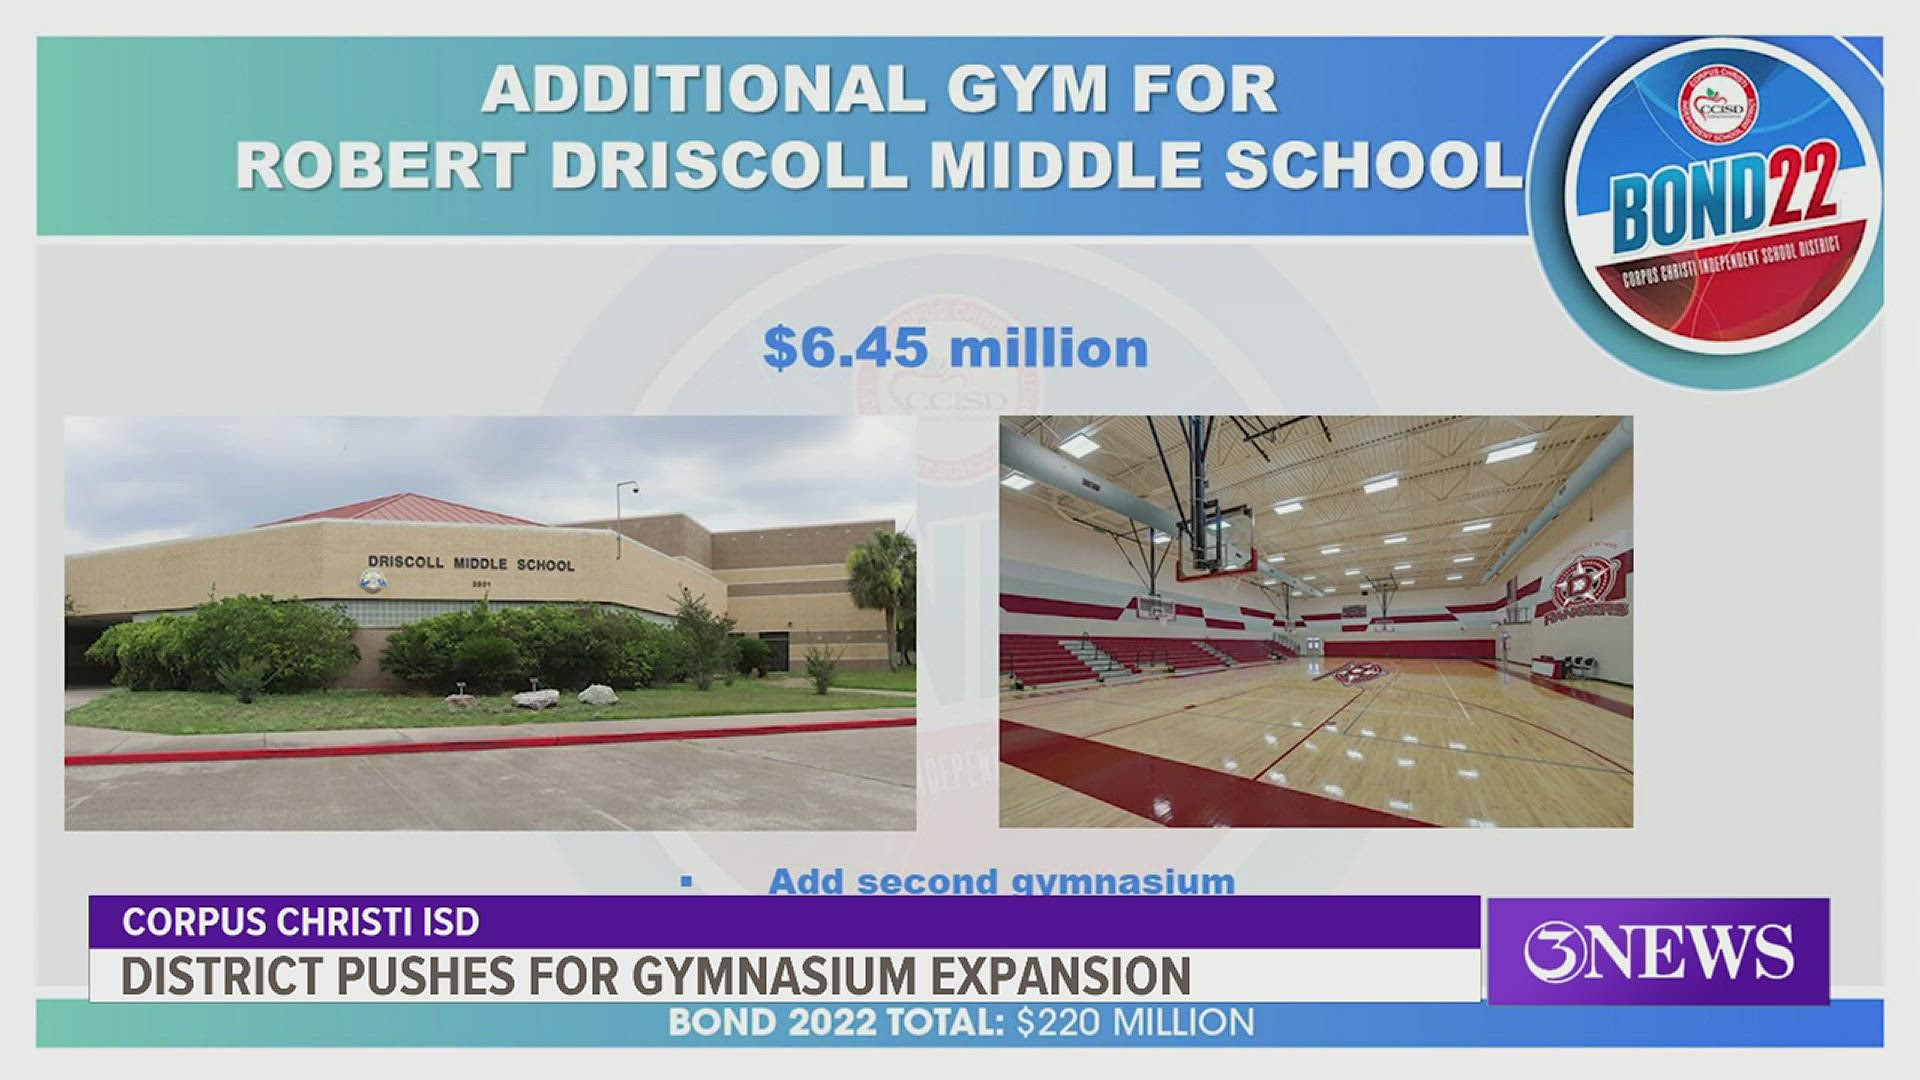 Two middle schools would get new gyms if CCISD bond passes